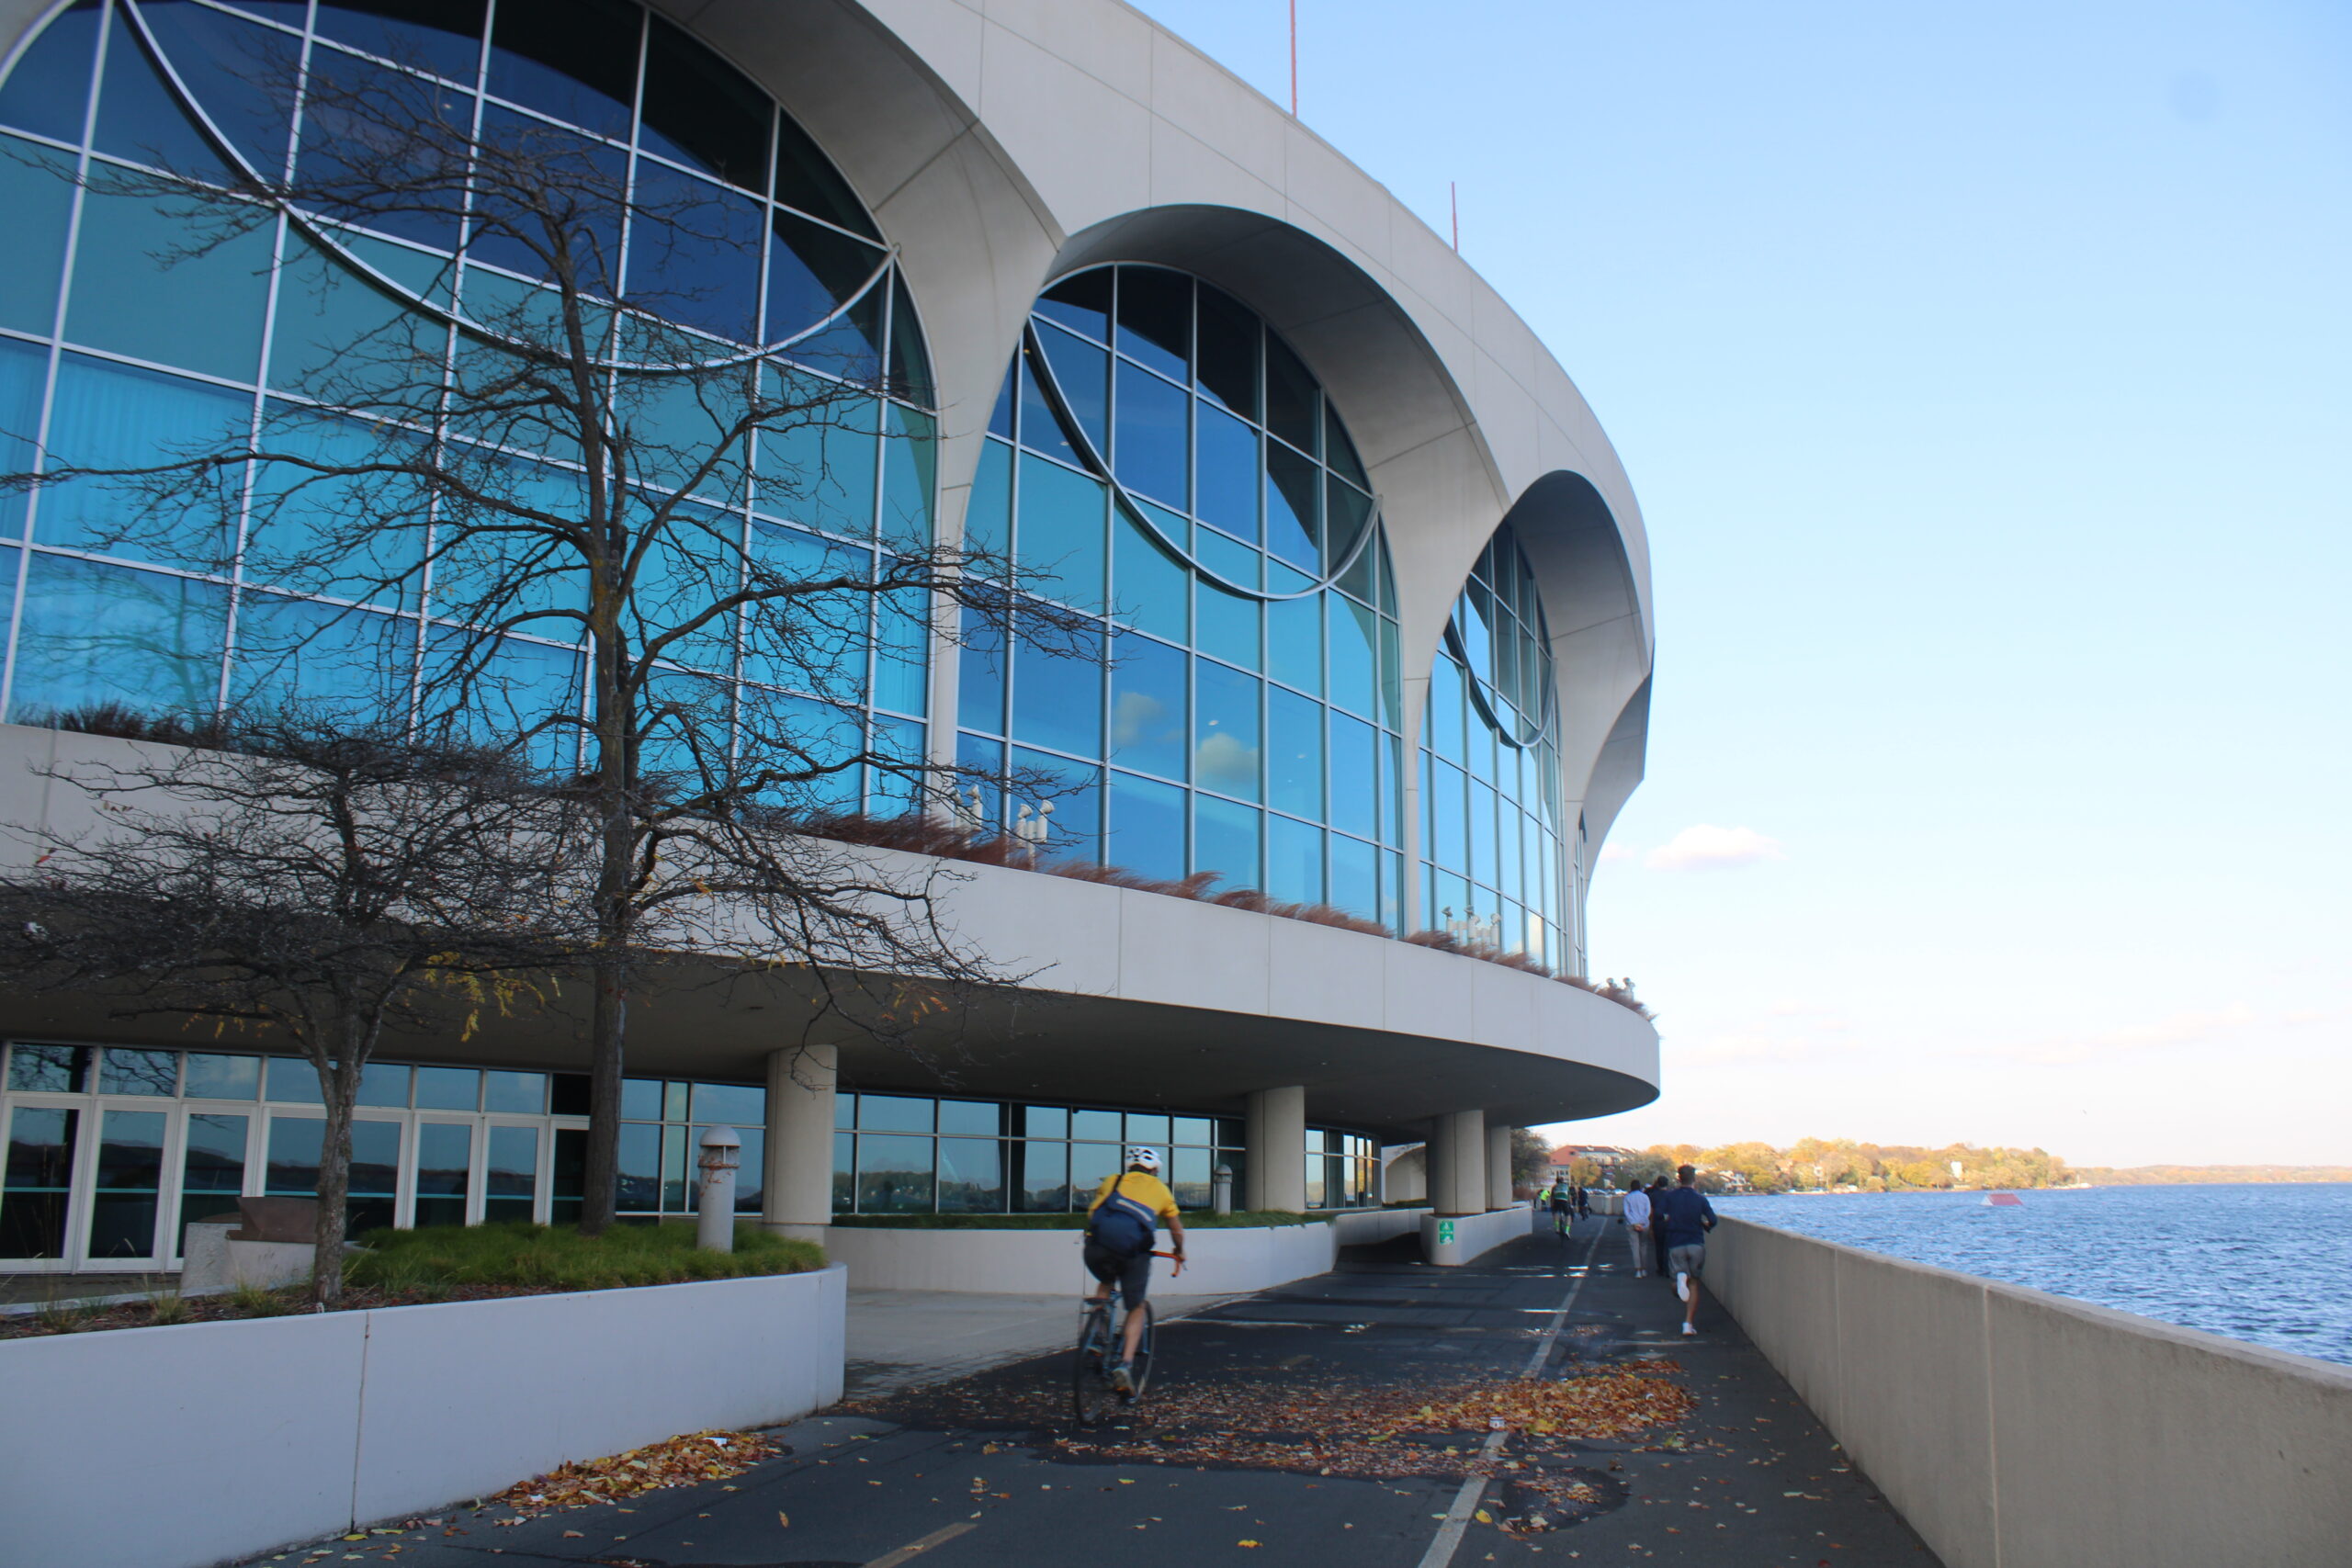 View of Monona Terrace from path.